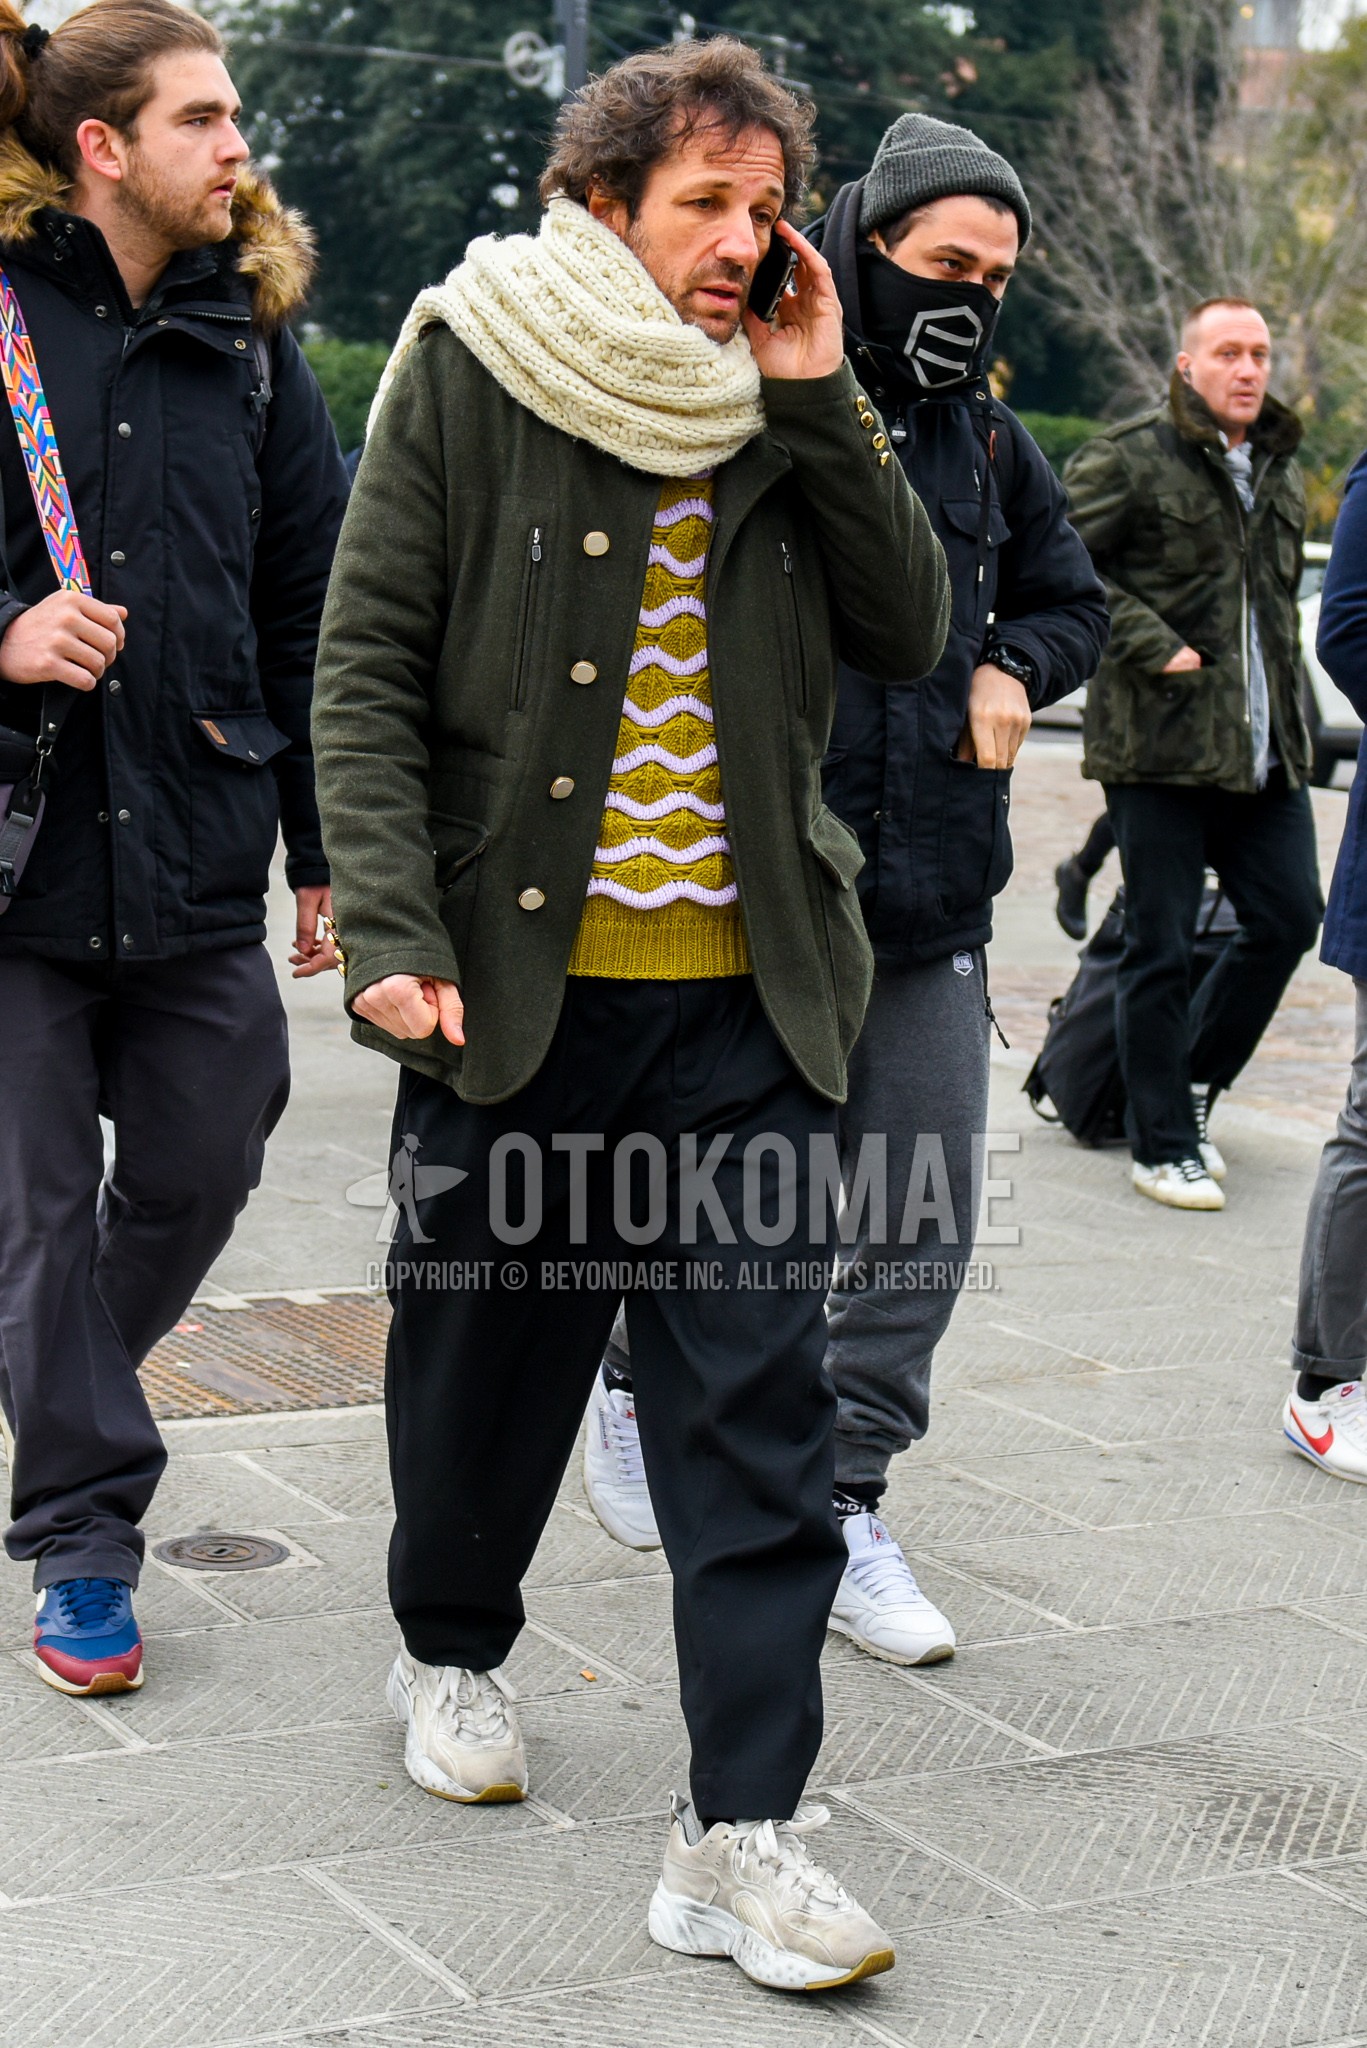 Men's winter outfit with white plain scarf, yellow tops/innerwear sweater, black plain wide pants, white low-cut sneakers.